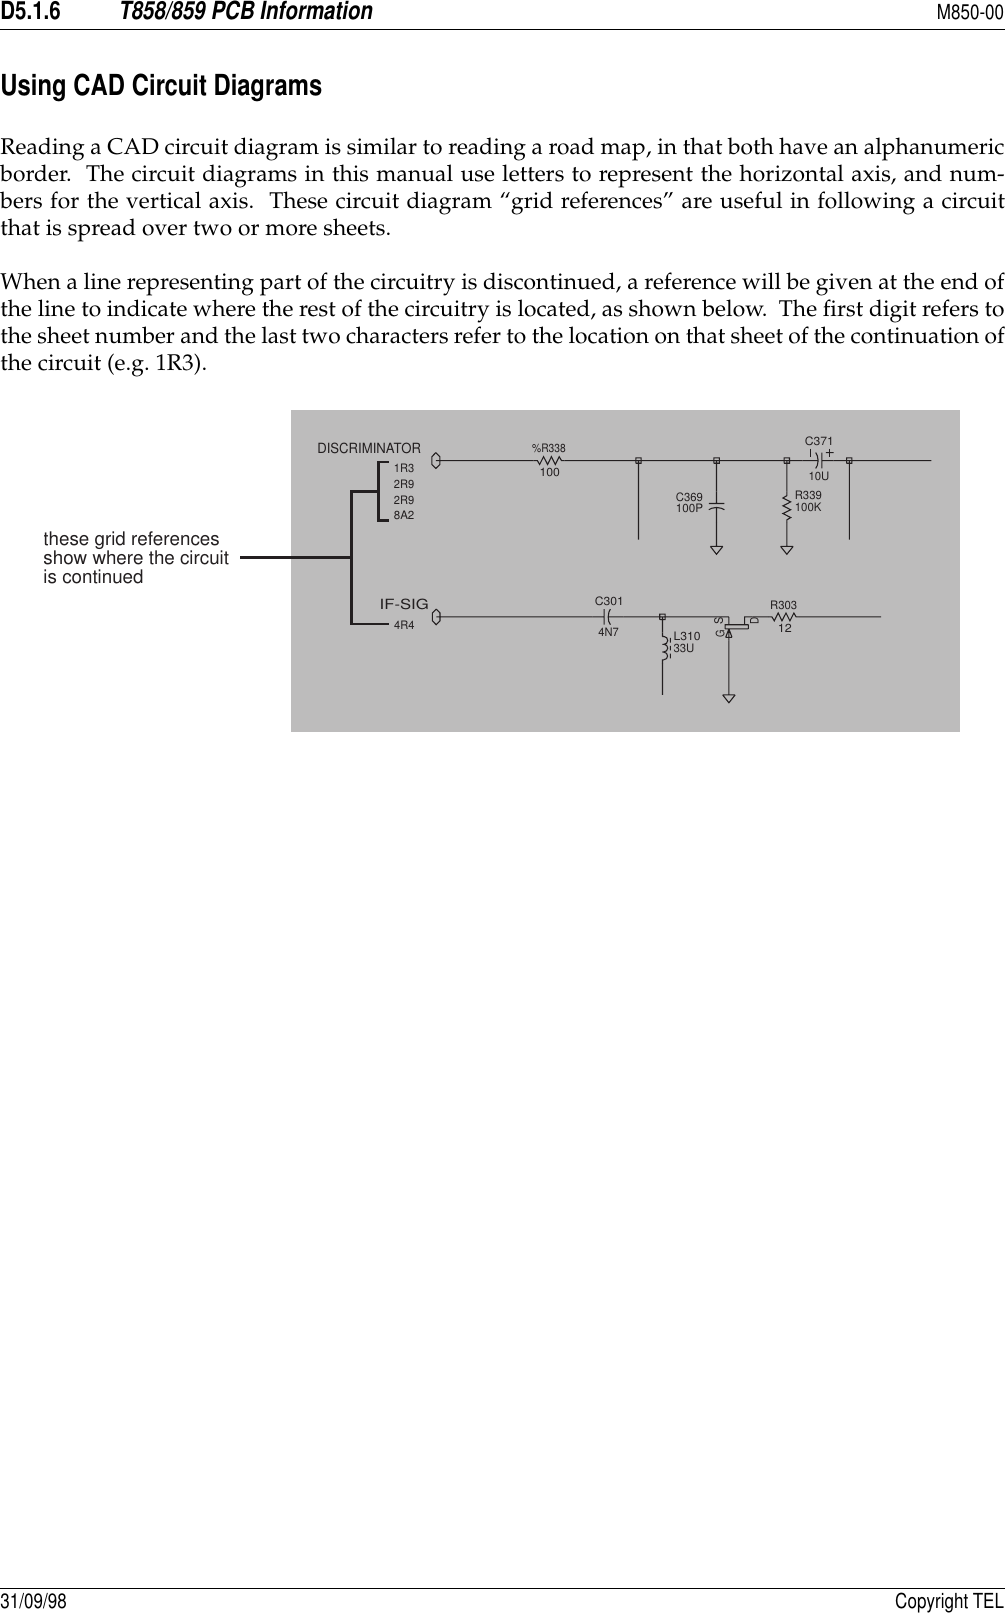 D5.1.6T858/859 PCB InformationM850-0031/09/98 Copyright TELUsing CAD Circuit DiagramsReading a CAD circuit diagram is similar to reading a road map, in that both have an alphanumericborder.  The circuit diagrams in this manual use letters to represent the horizontal axis, and num-bers for the vertical axis.  These circuit diagram “grid references” are useful in following a circuitthat is spread over two or more sheets.When a line representing part of the circuitry is discontinued, a reference will be given at the end ofthe line to indicate where the rest of the circuitry is located, as shown below.  The first digit refers tothe sheet number and the last two characters refer to the location on that sheet of the continuation ofthe circuit (e.g. 1R3).C3014N7R30312DSGL31033UIF-SIG4R4C369100PC37110UR339100K%R338100DISCRIMINATOR1R32R92R98A2these grid referencesshow where the circuitis continued